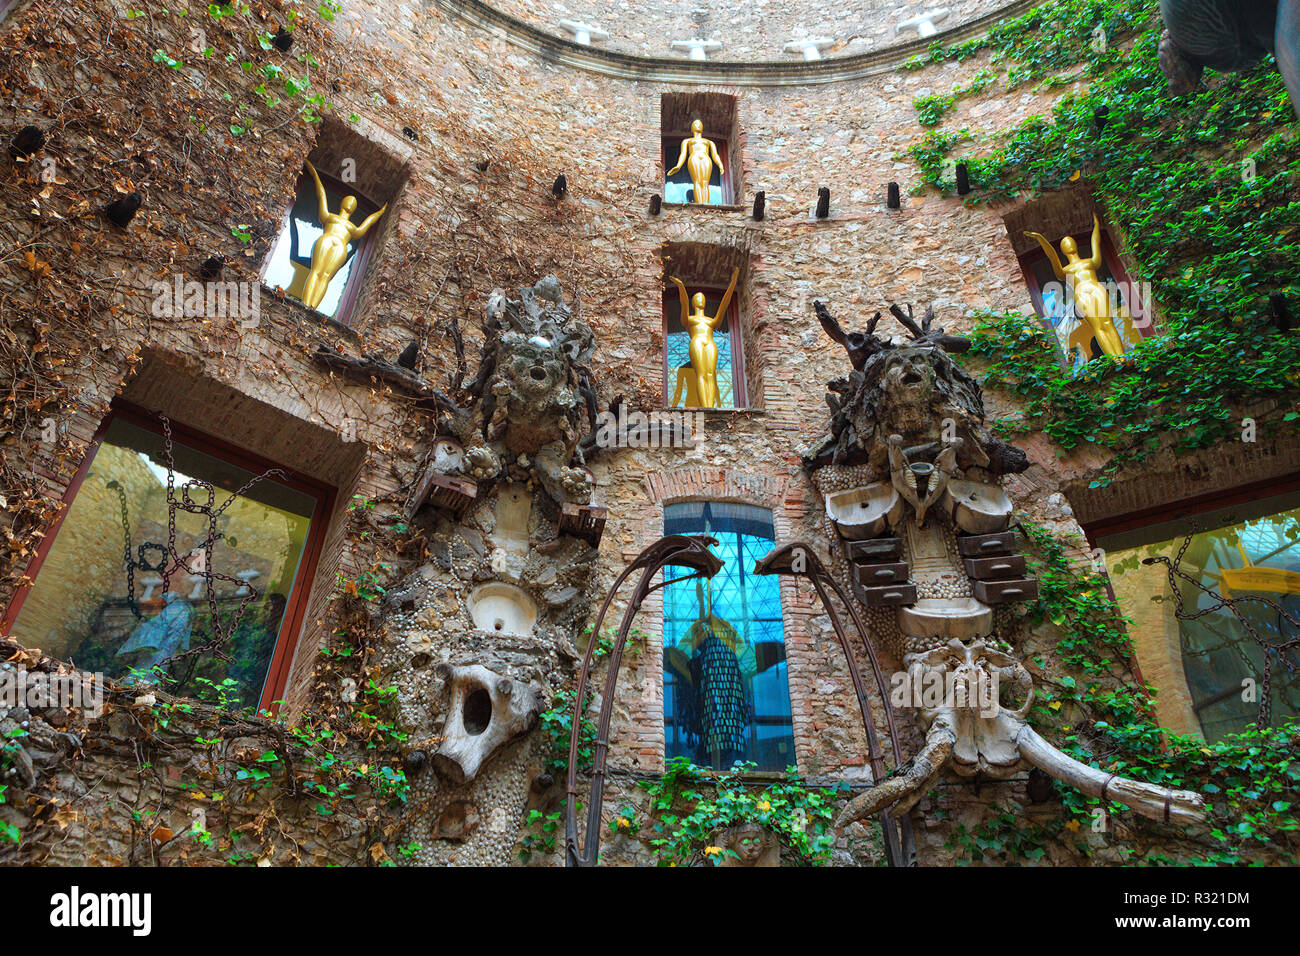 Figueres, Spain - June 17, 2014: Fragment of Main courtyard in Dali's Theatre - Museum building, opened on September 28, 1974 and housing the largest  Stock Photo